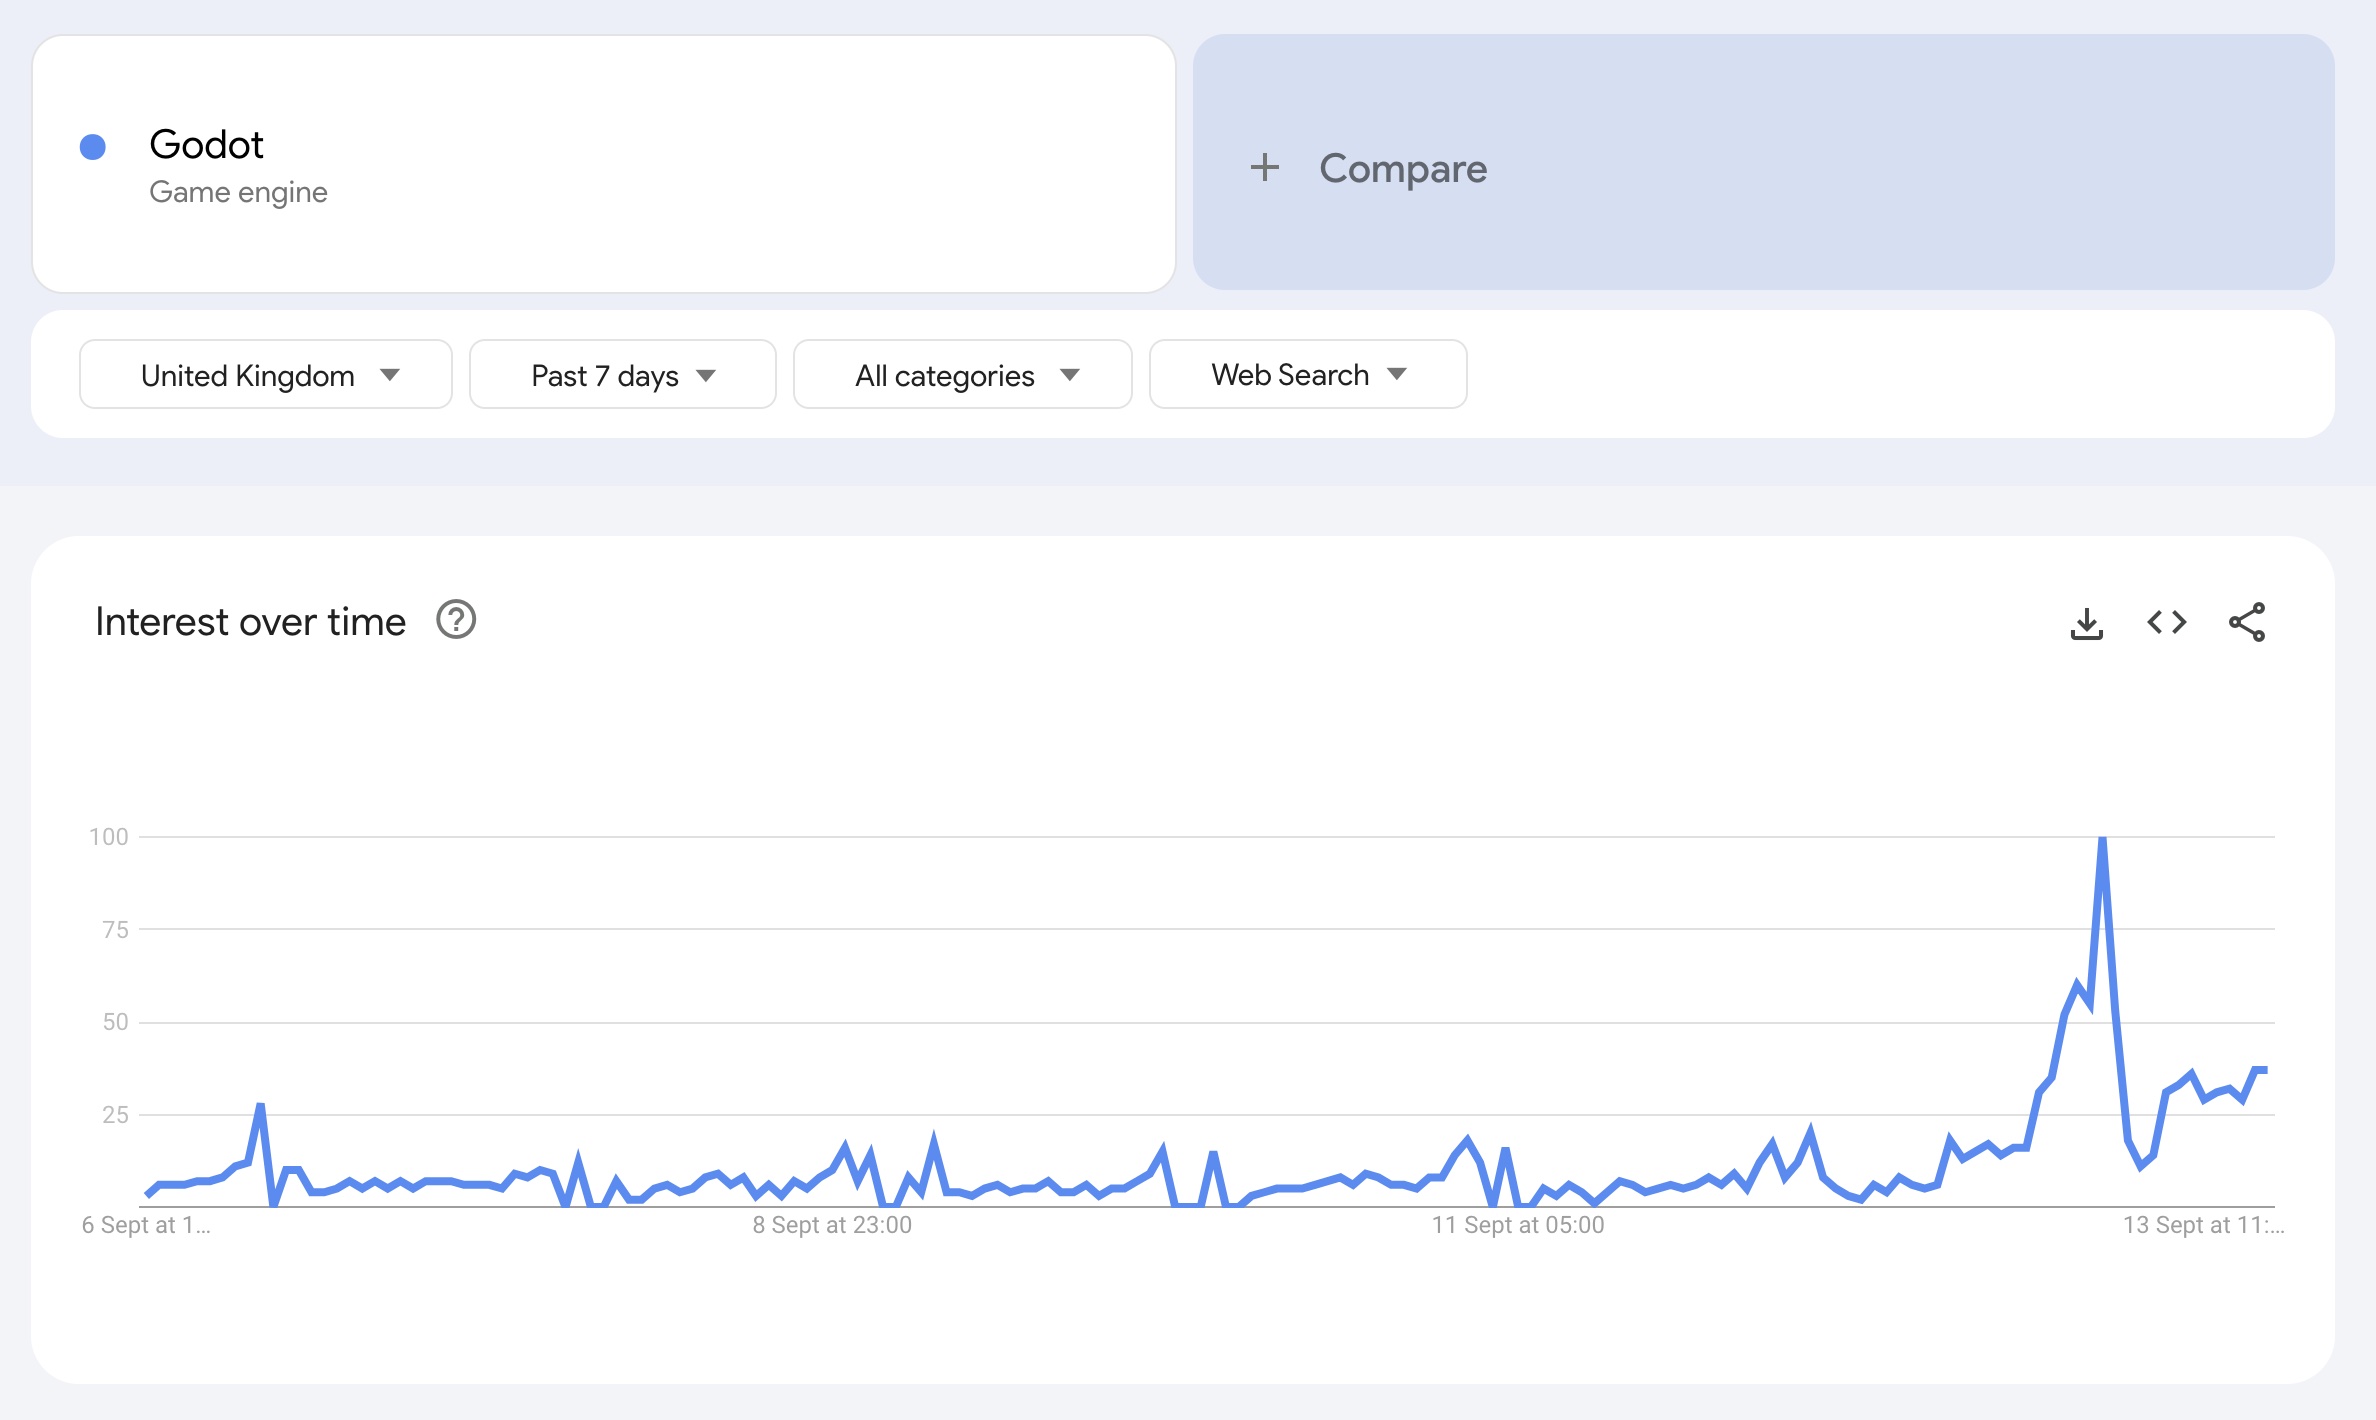 Google search trend for Godot, showing a big spike.